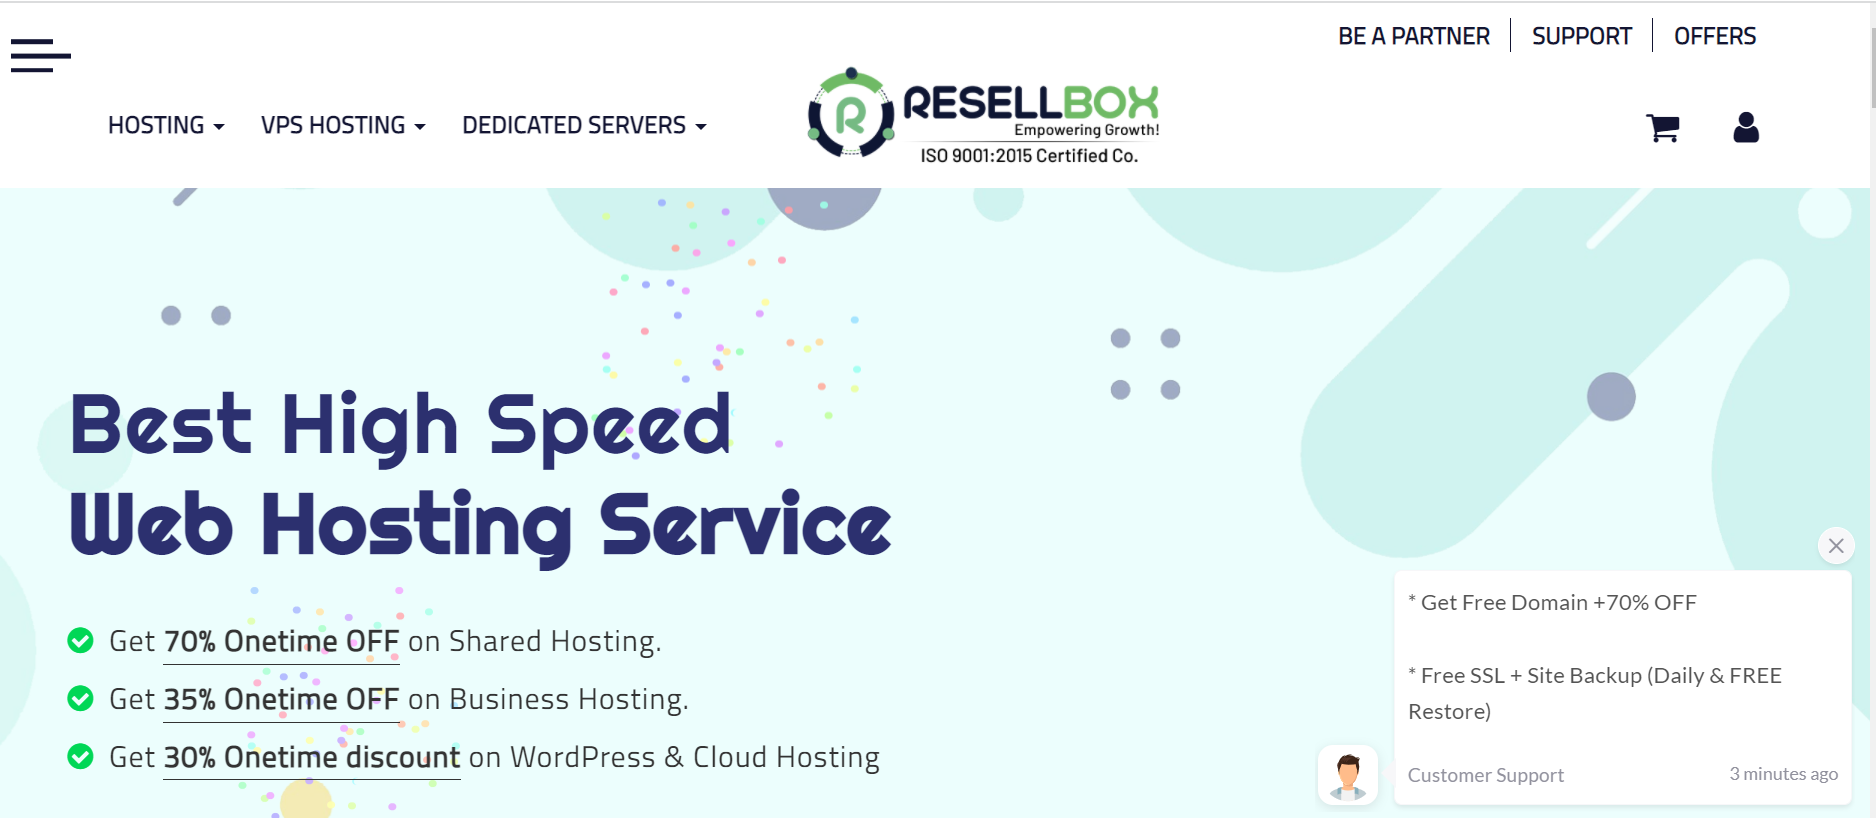 Business logo of Resellbox